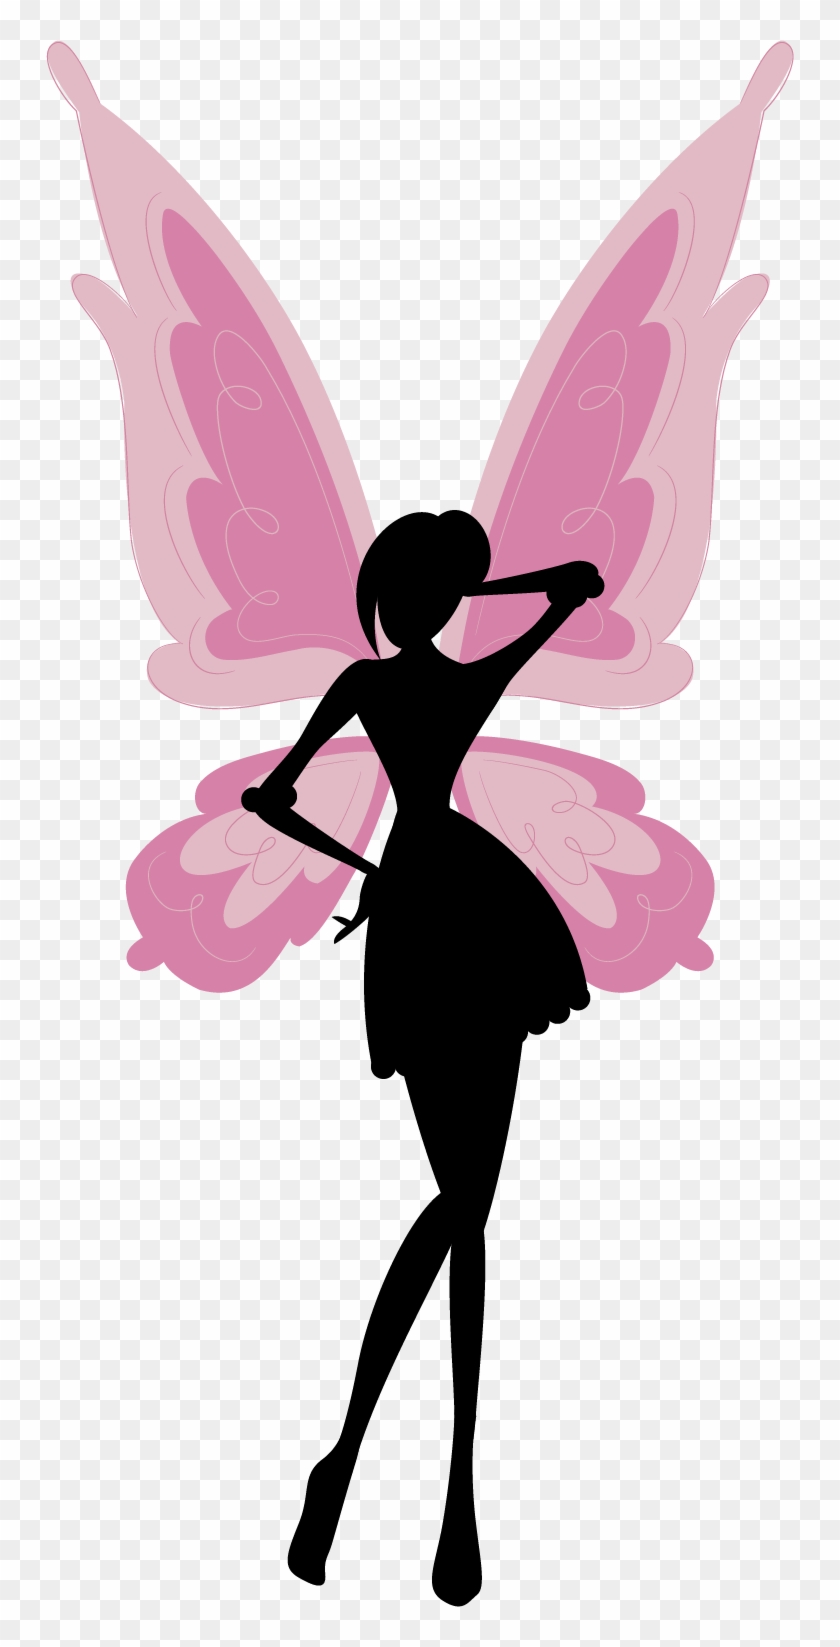 Angel Tattoos Clipart Png Image 04 - Gift #199028